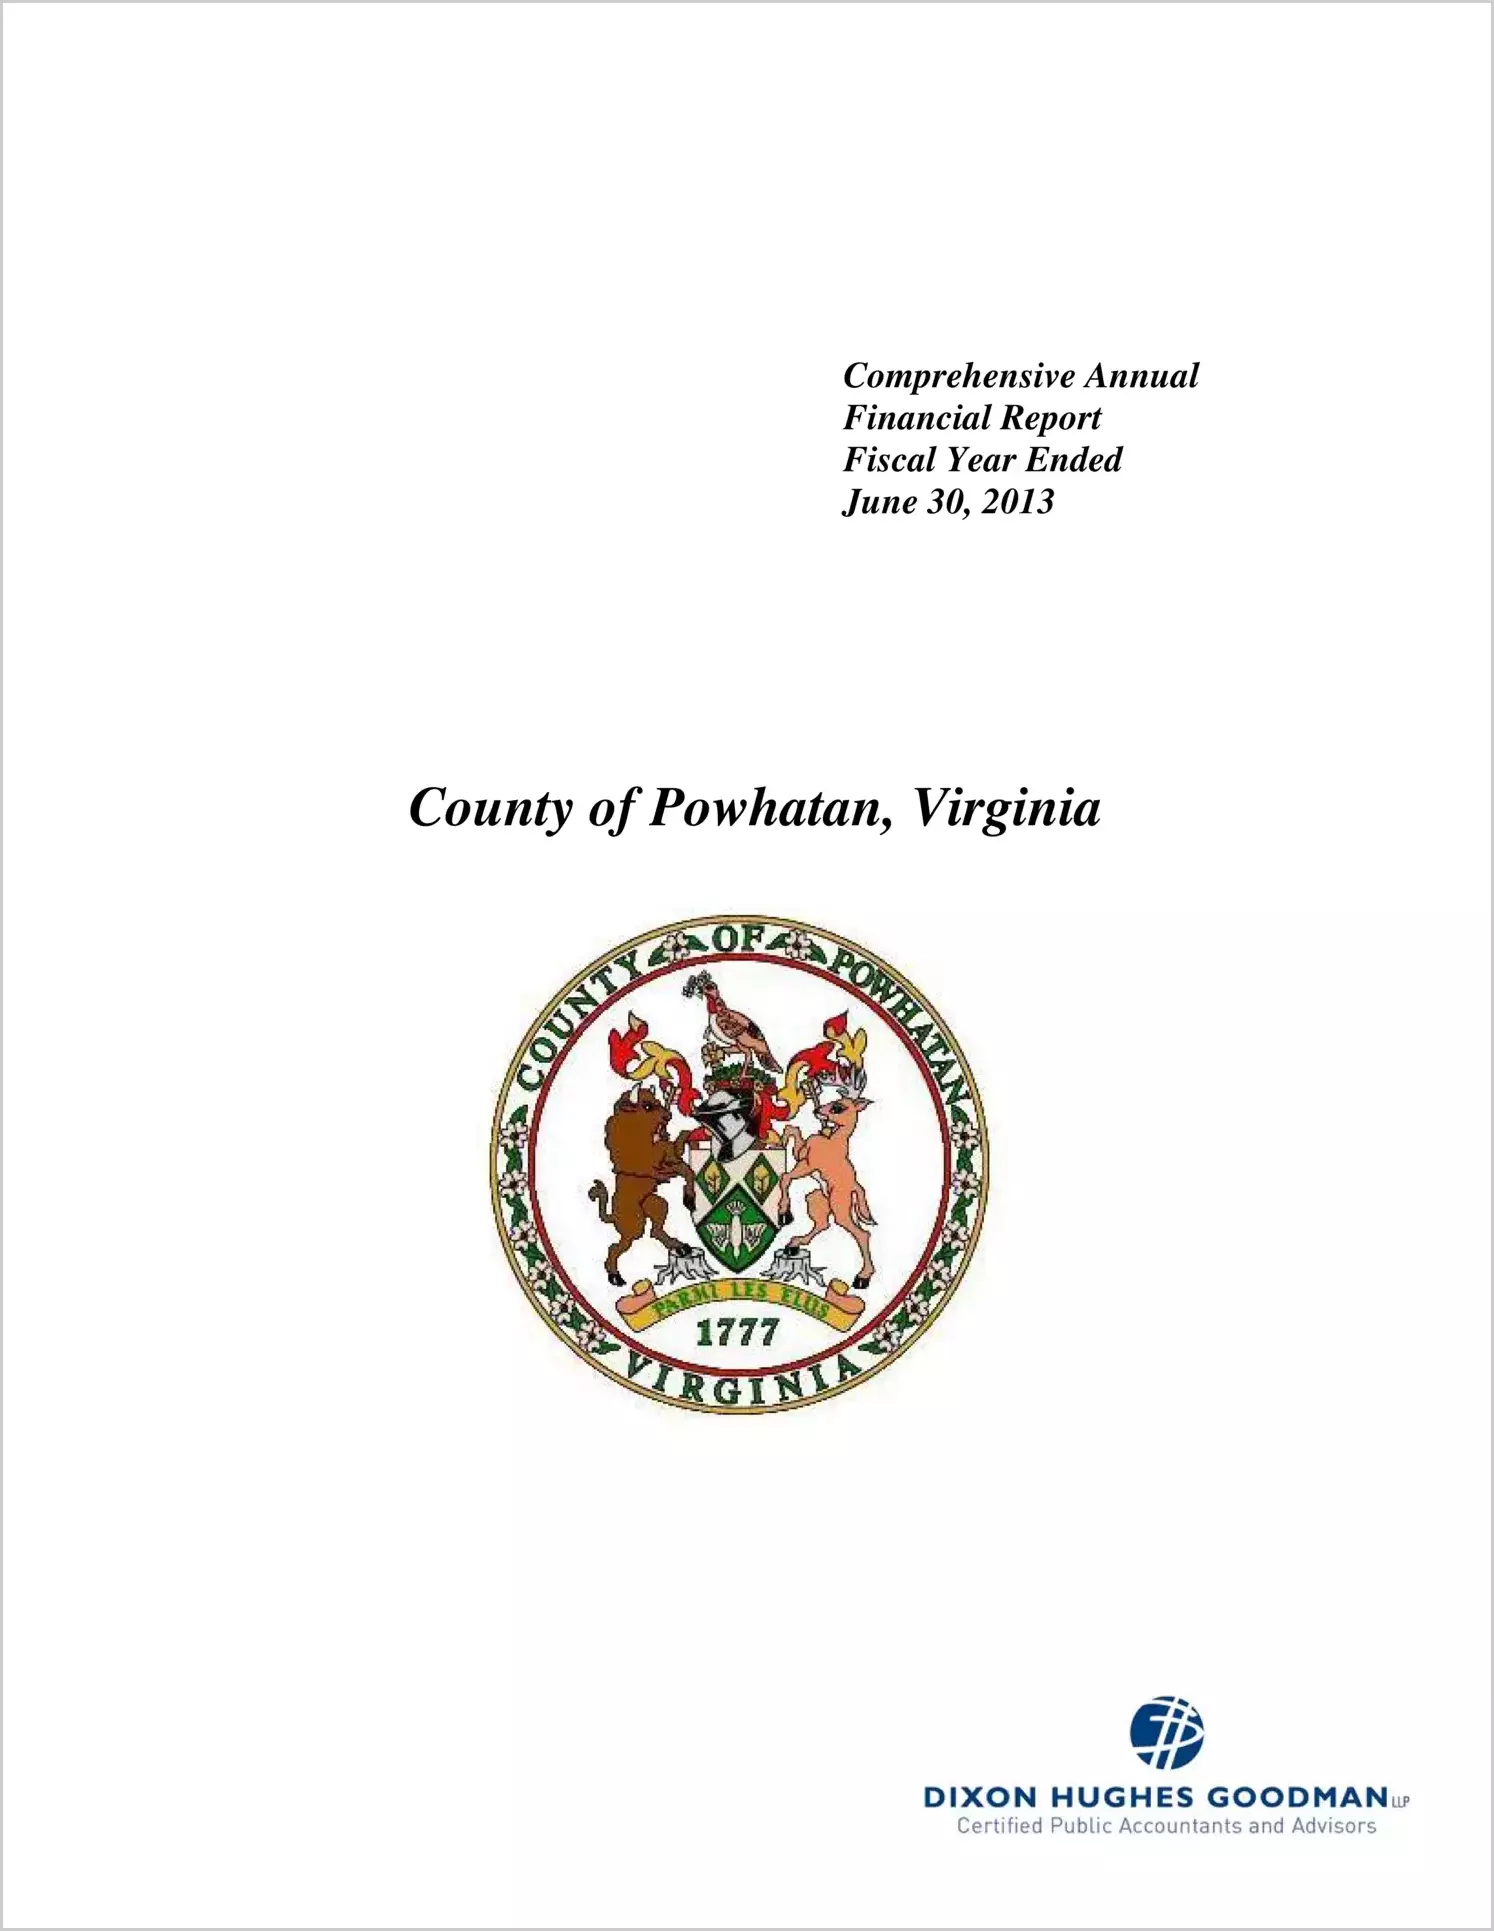 2013 Annual Financial Report for County of Powhatan